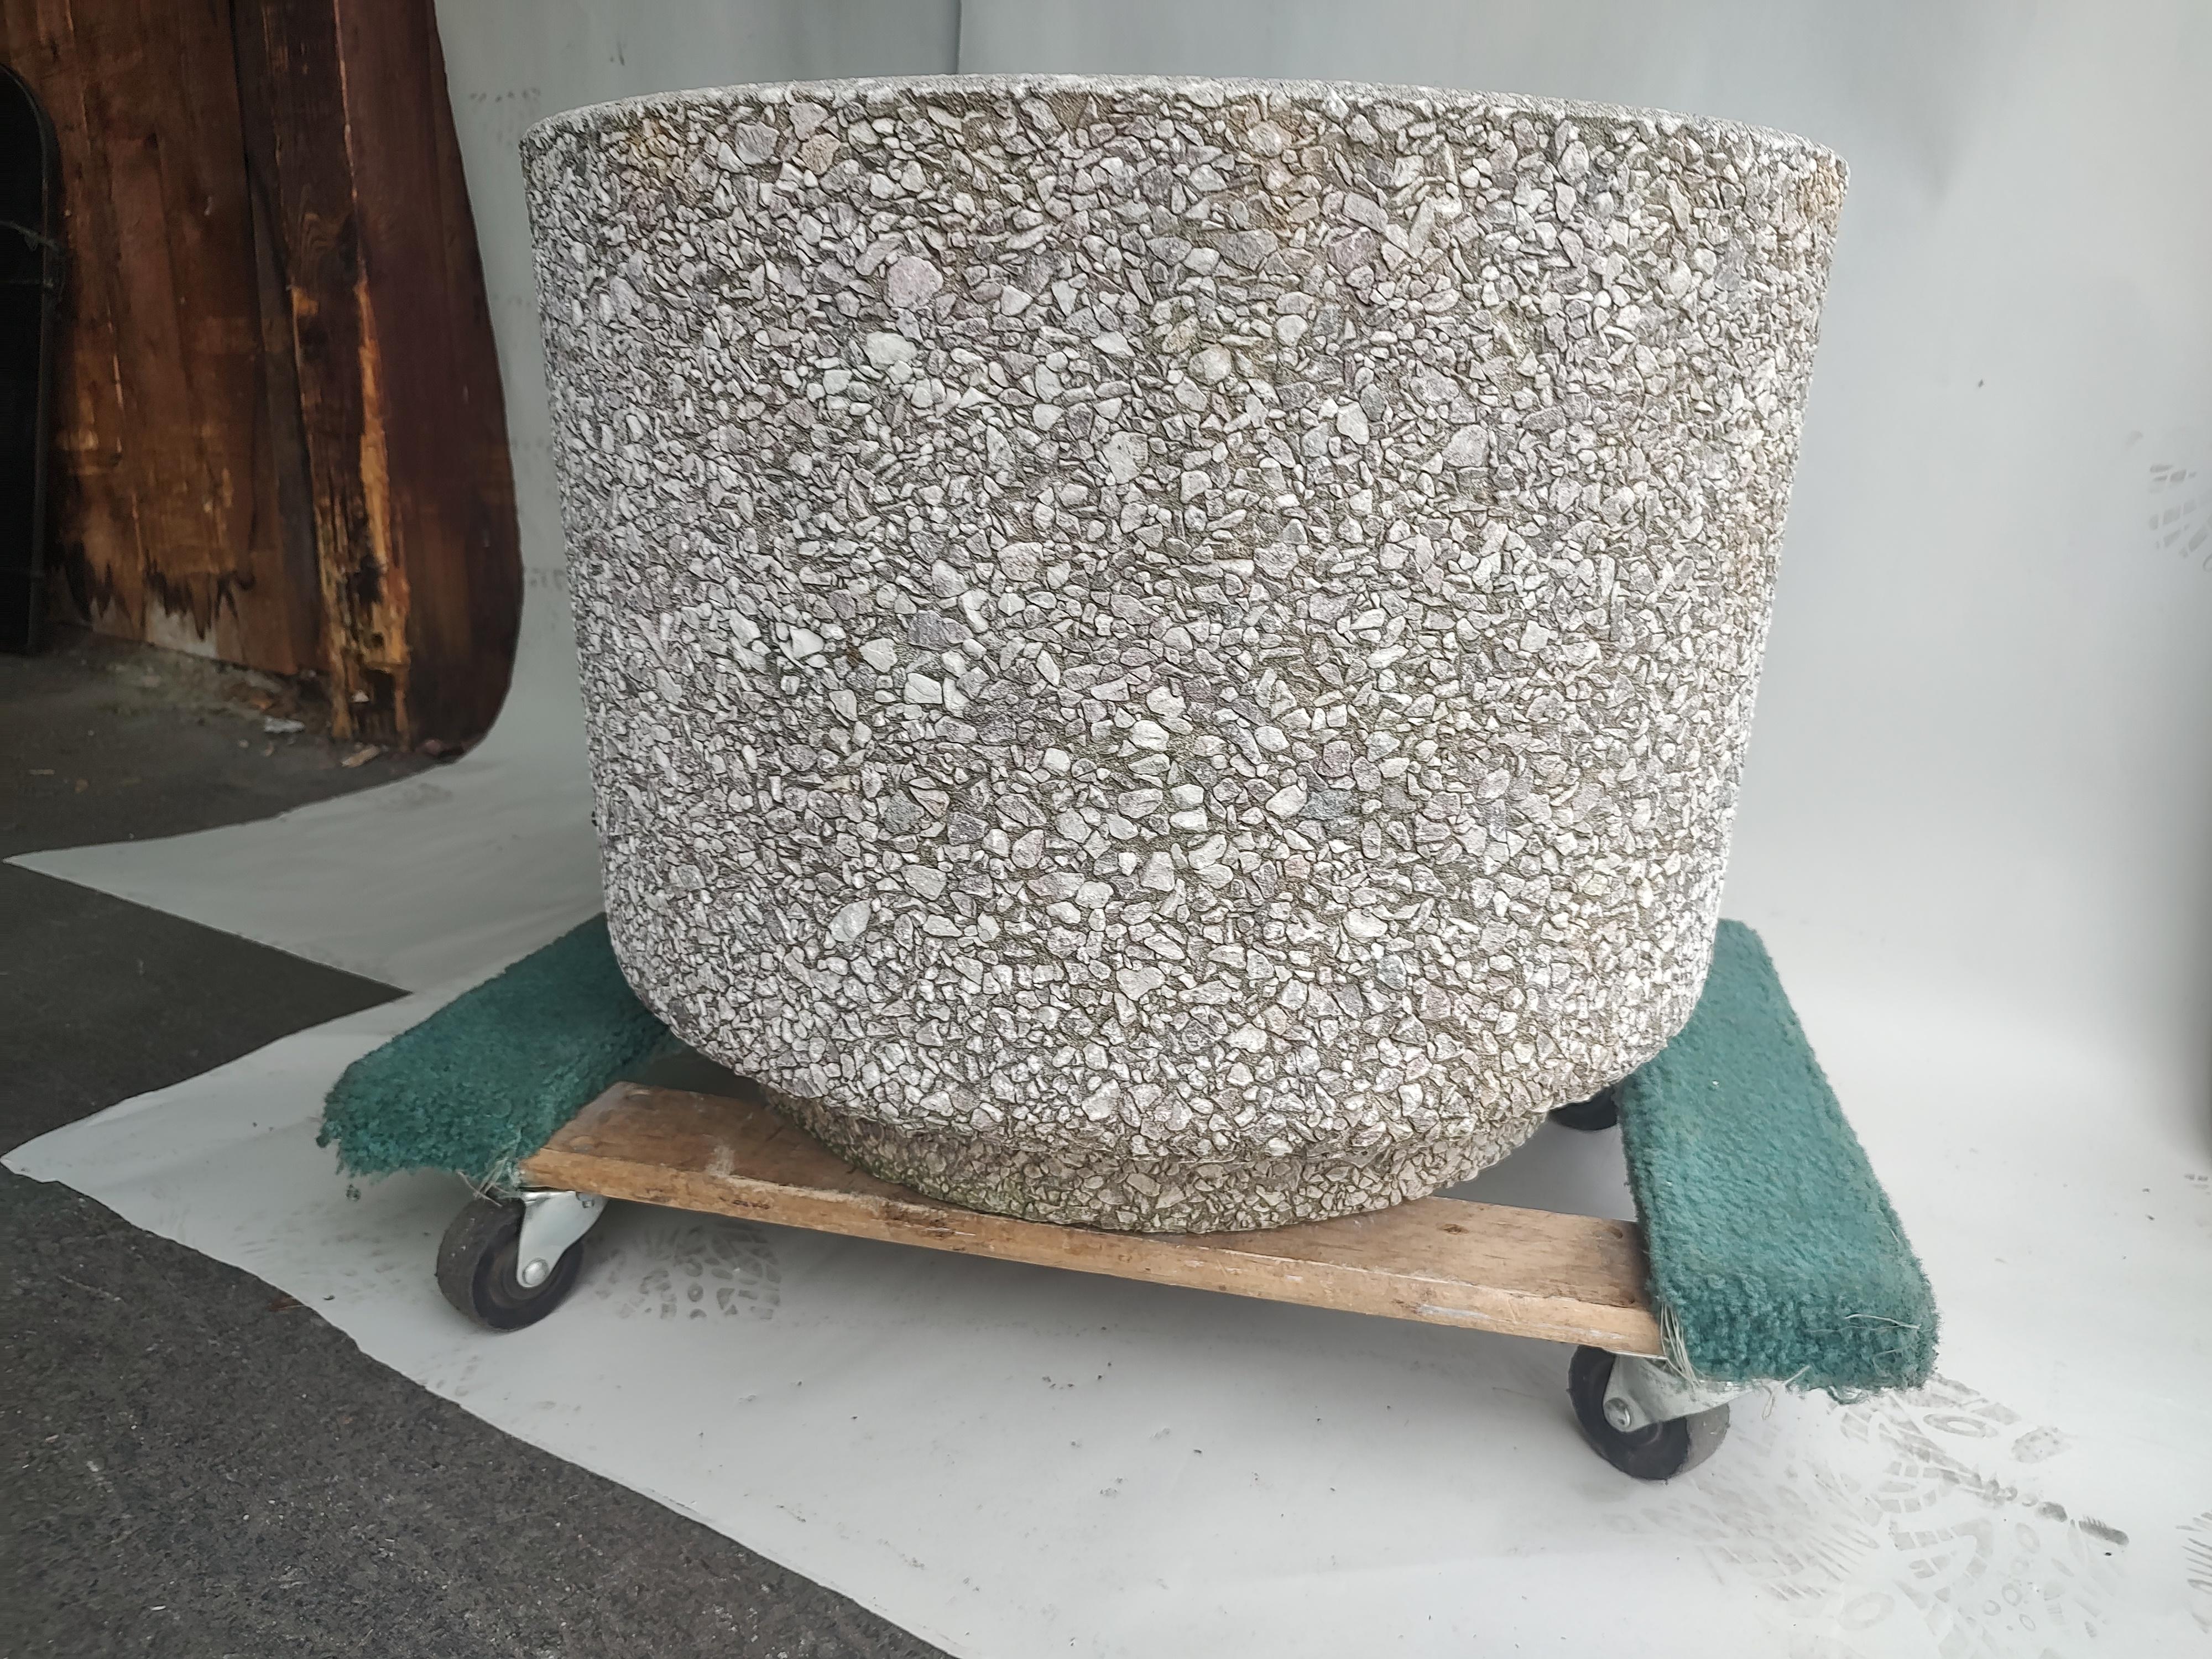 Fabulous Brutalist Style pebbled planters in a cast stone round form. Measures: 26 x 20h can hold whatever you would like, small trees to shrubs to plant and flower combinations. Drainage holes in all 3 planters.  In excellent vintage condition with